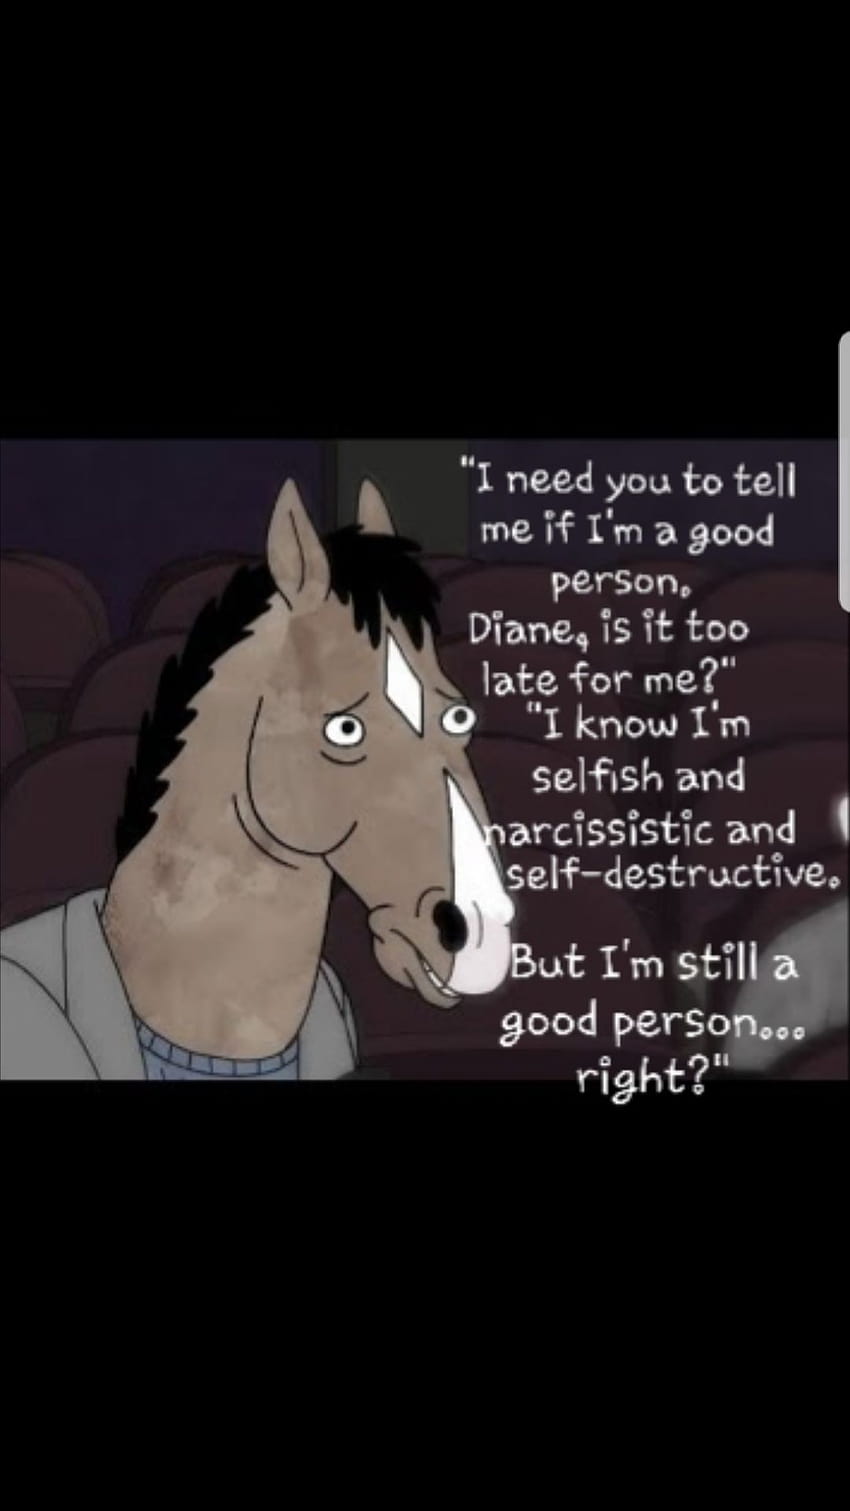 Due to some people asking, here's a sad ...reddit, bojack horseman quotes HD phone wallpaper